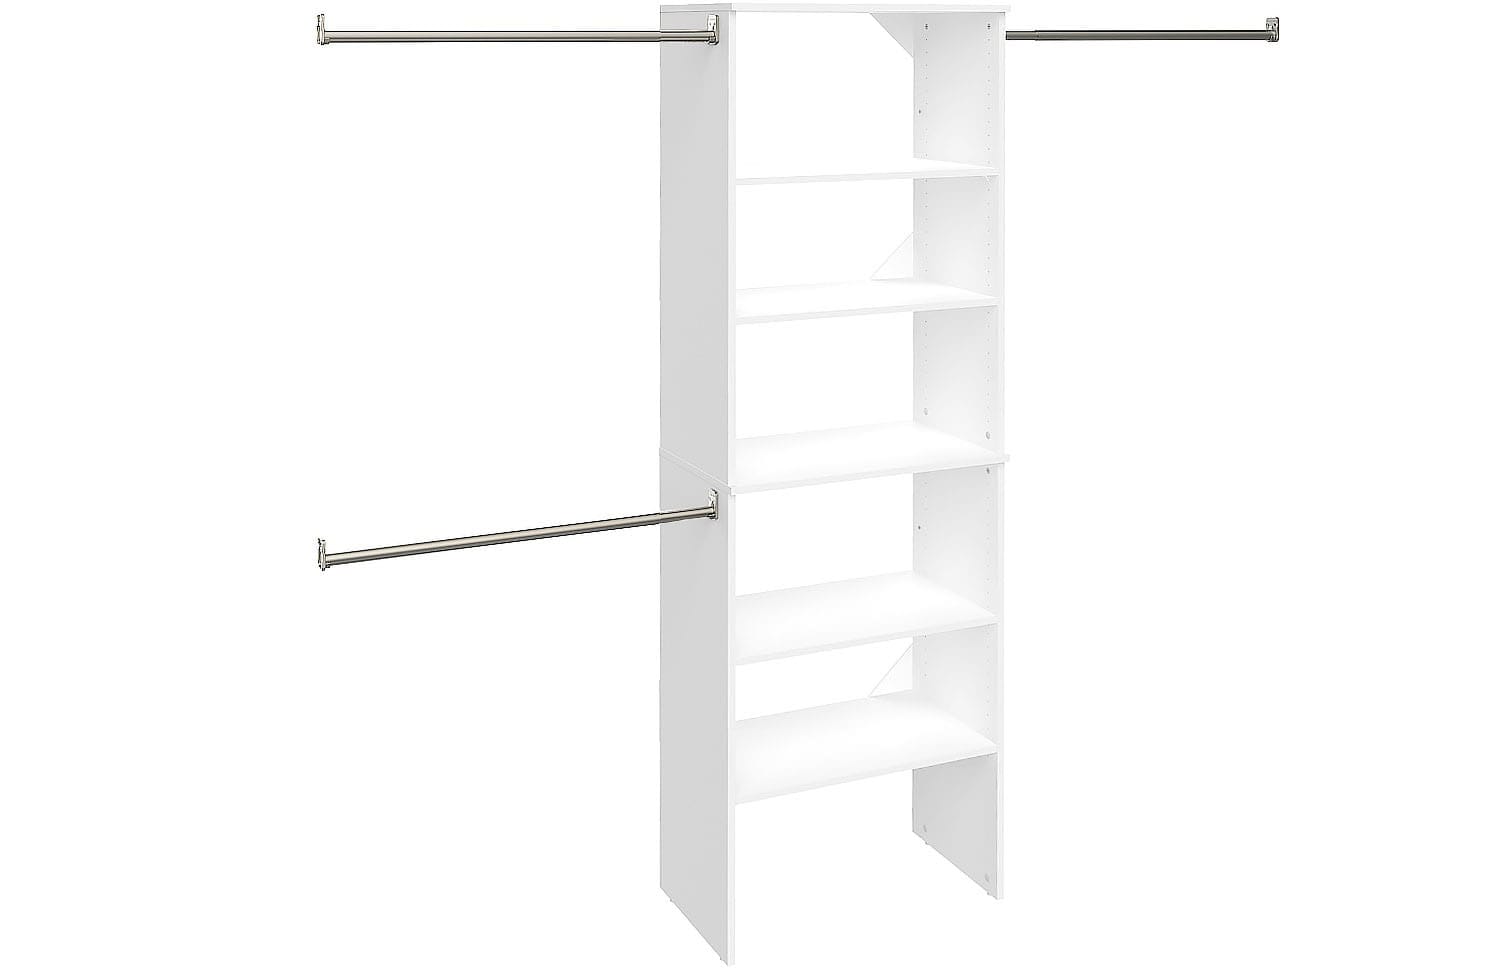 SuiteSymphony 23.7 Shelving - Set of 2, Pure White